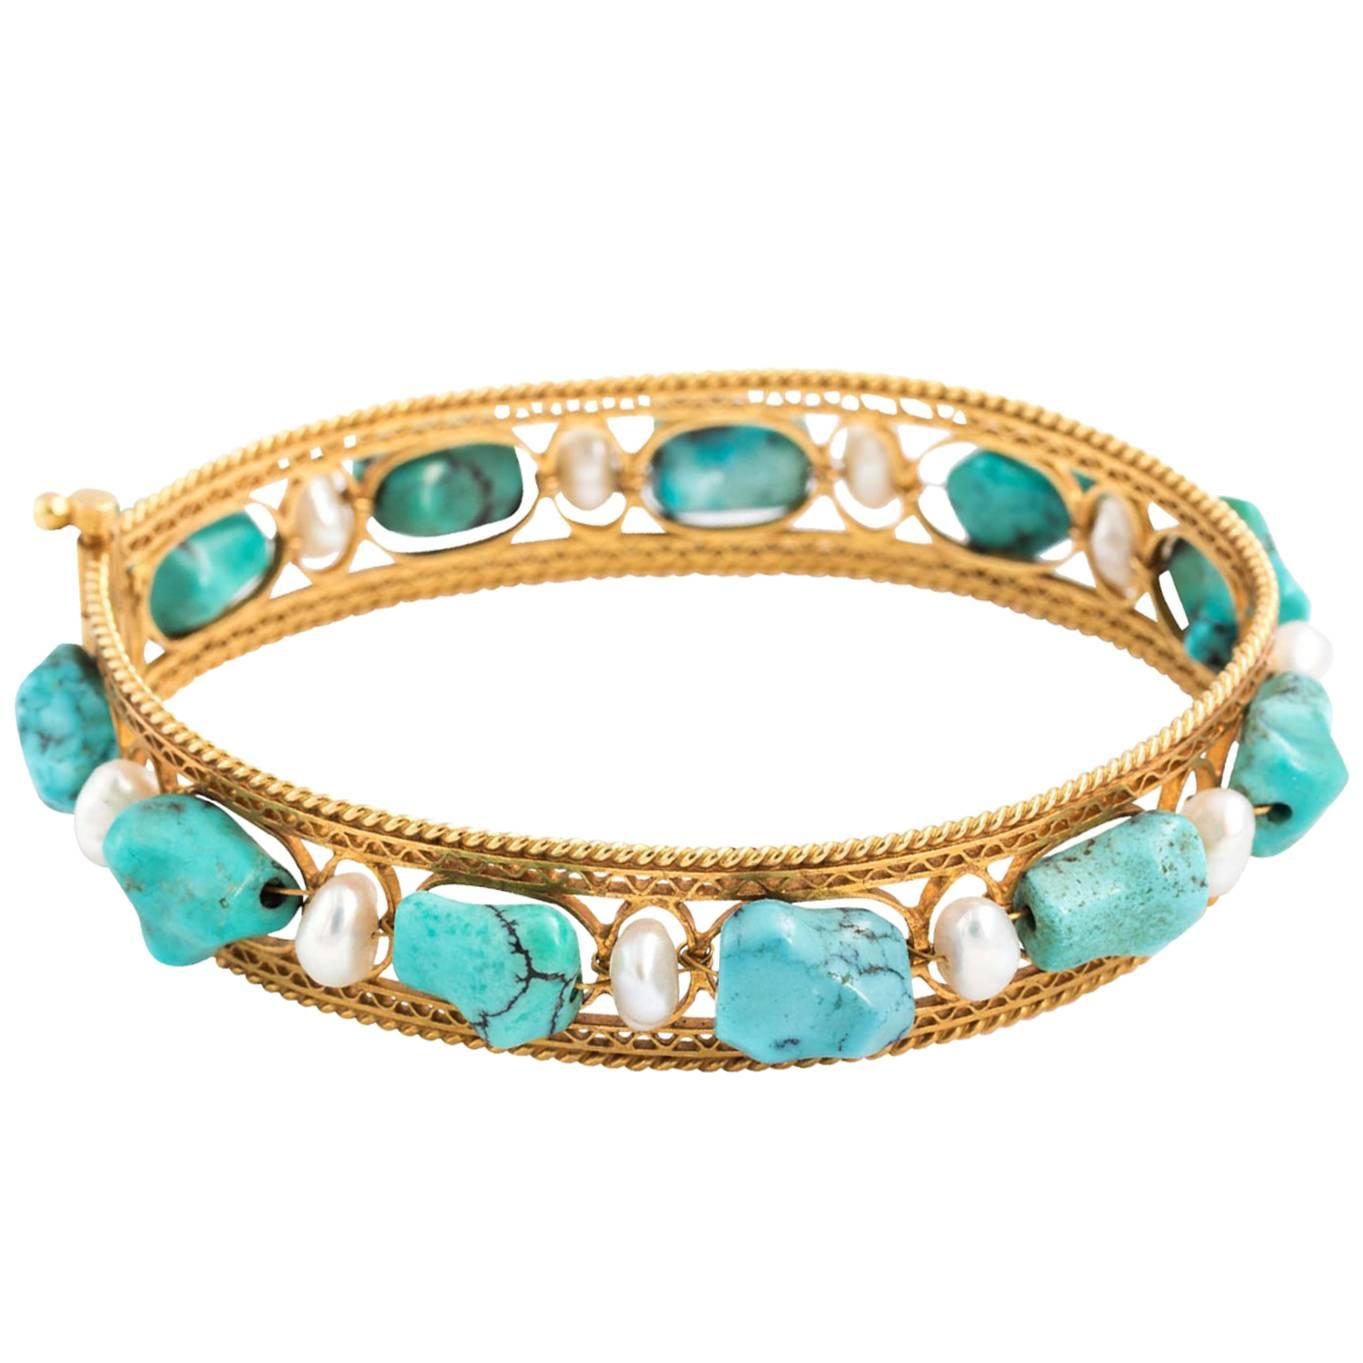 Persian Gold, Turquoise and Pearl Bracelet